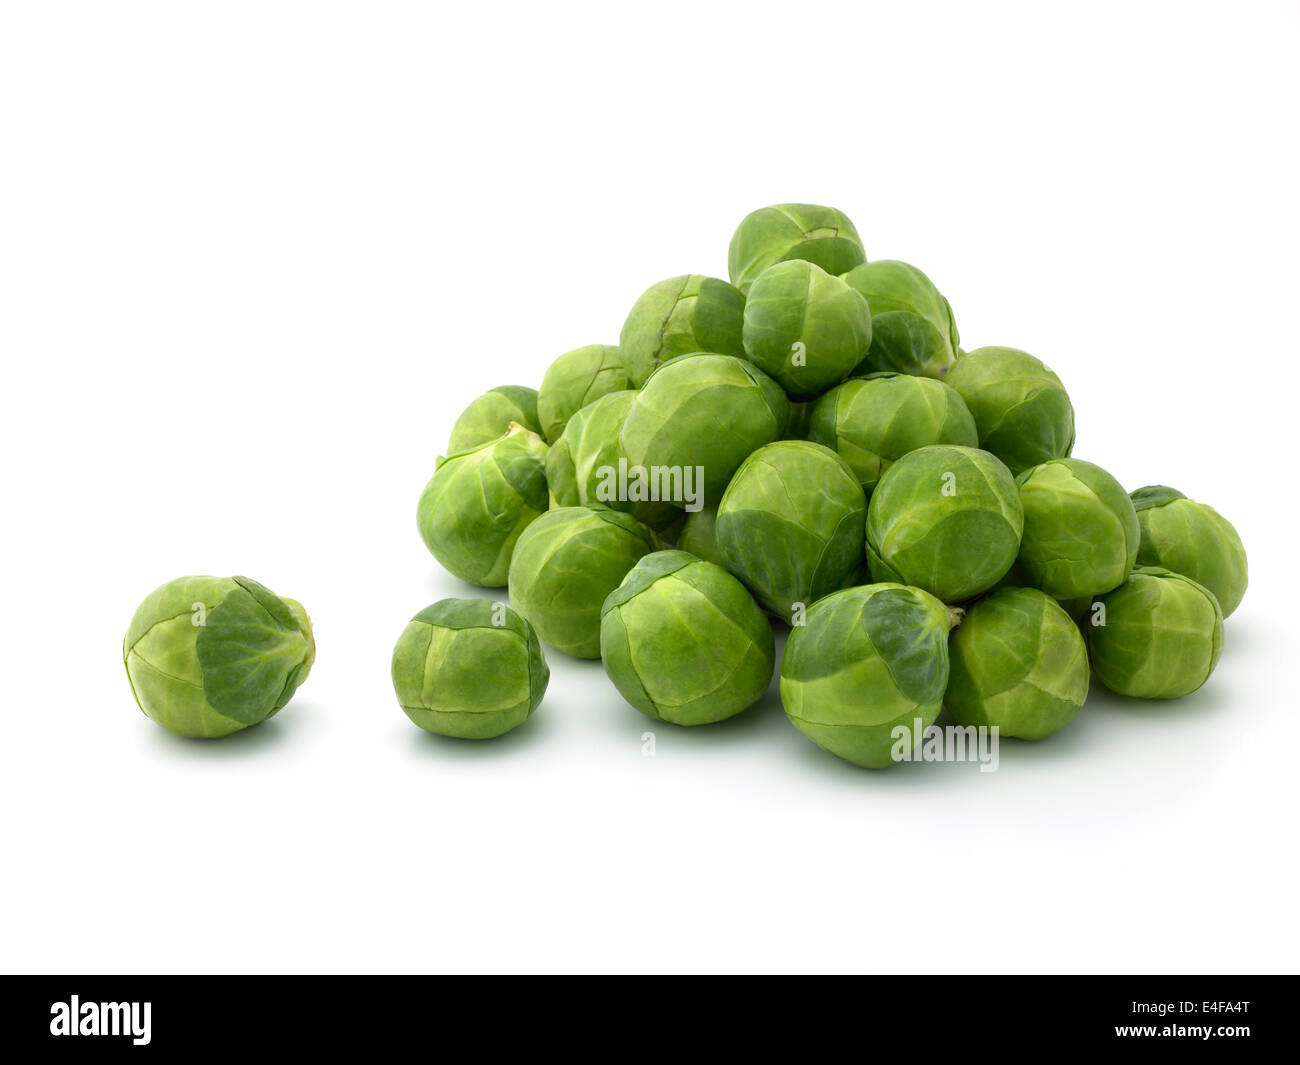 brussels sprouts Stock Photo